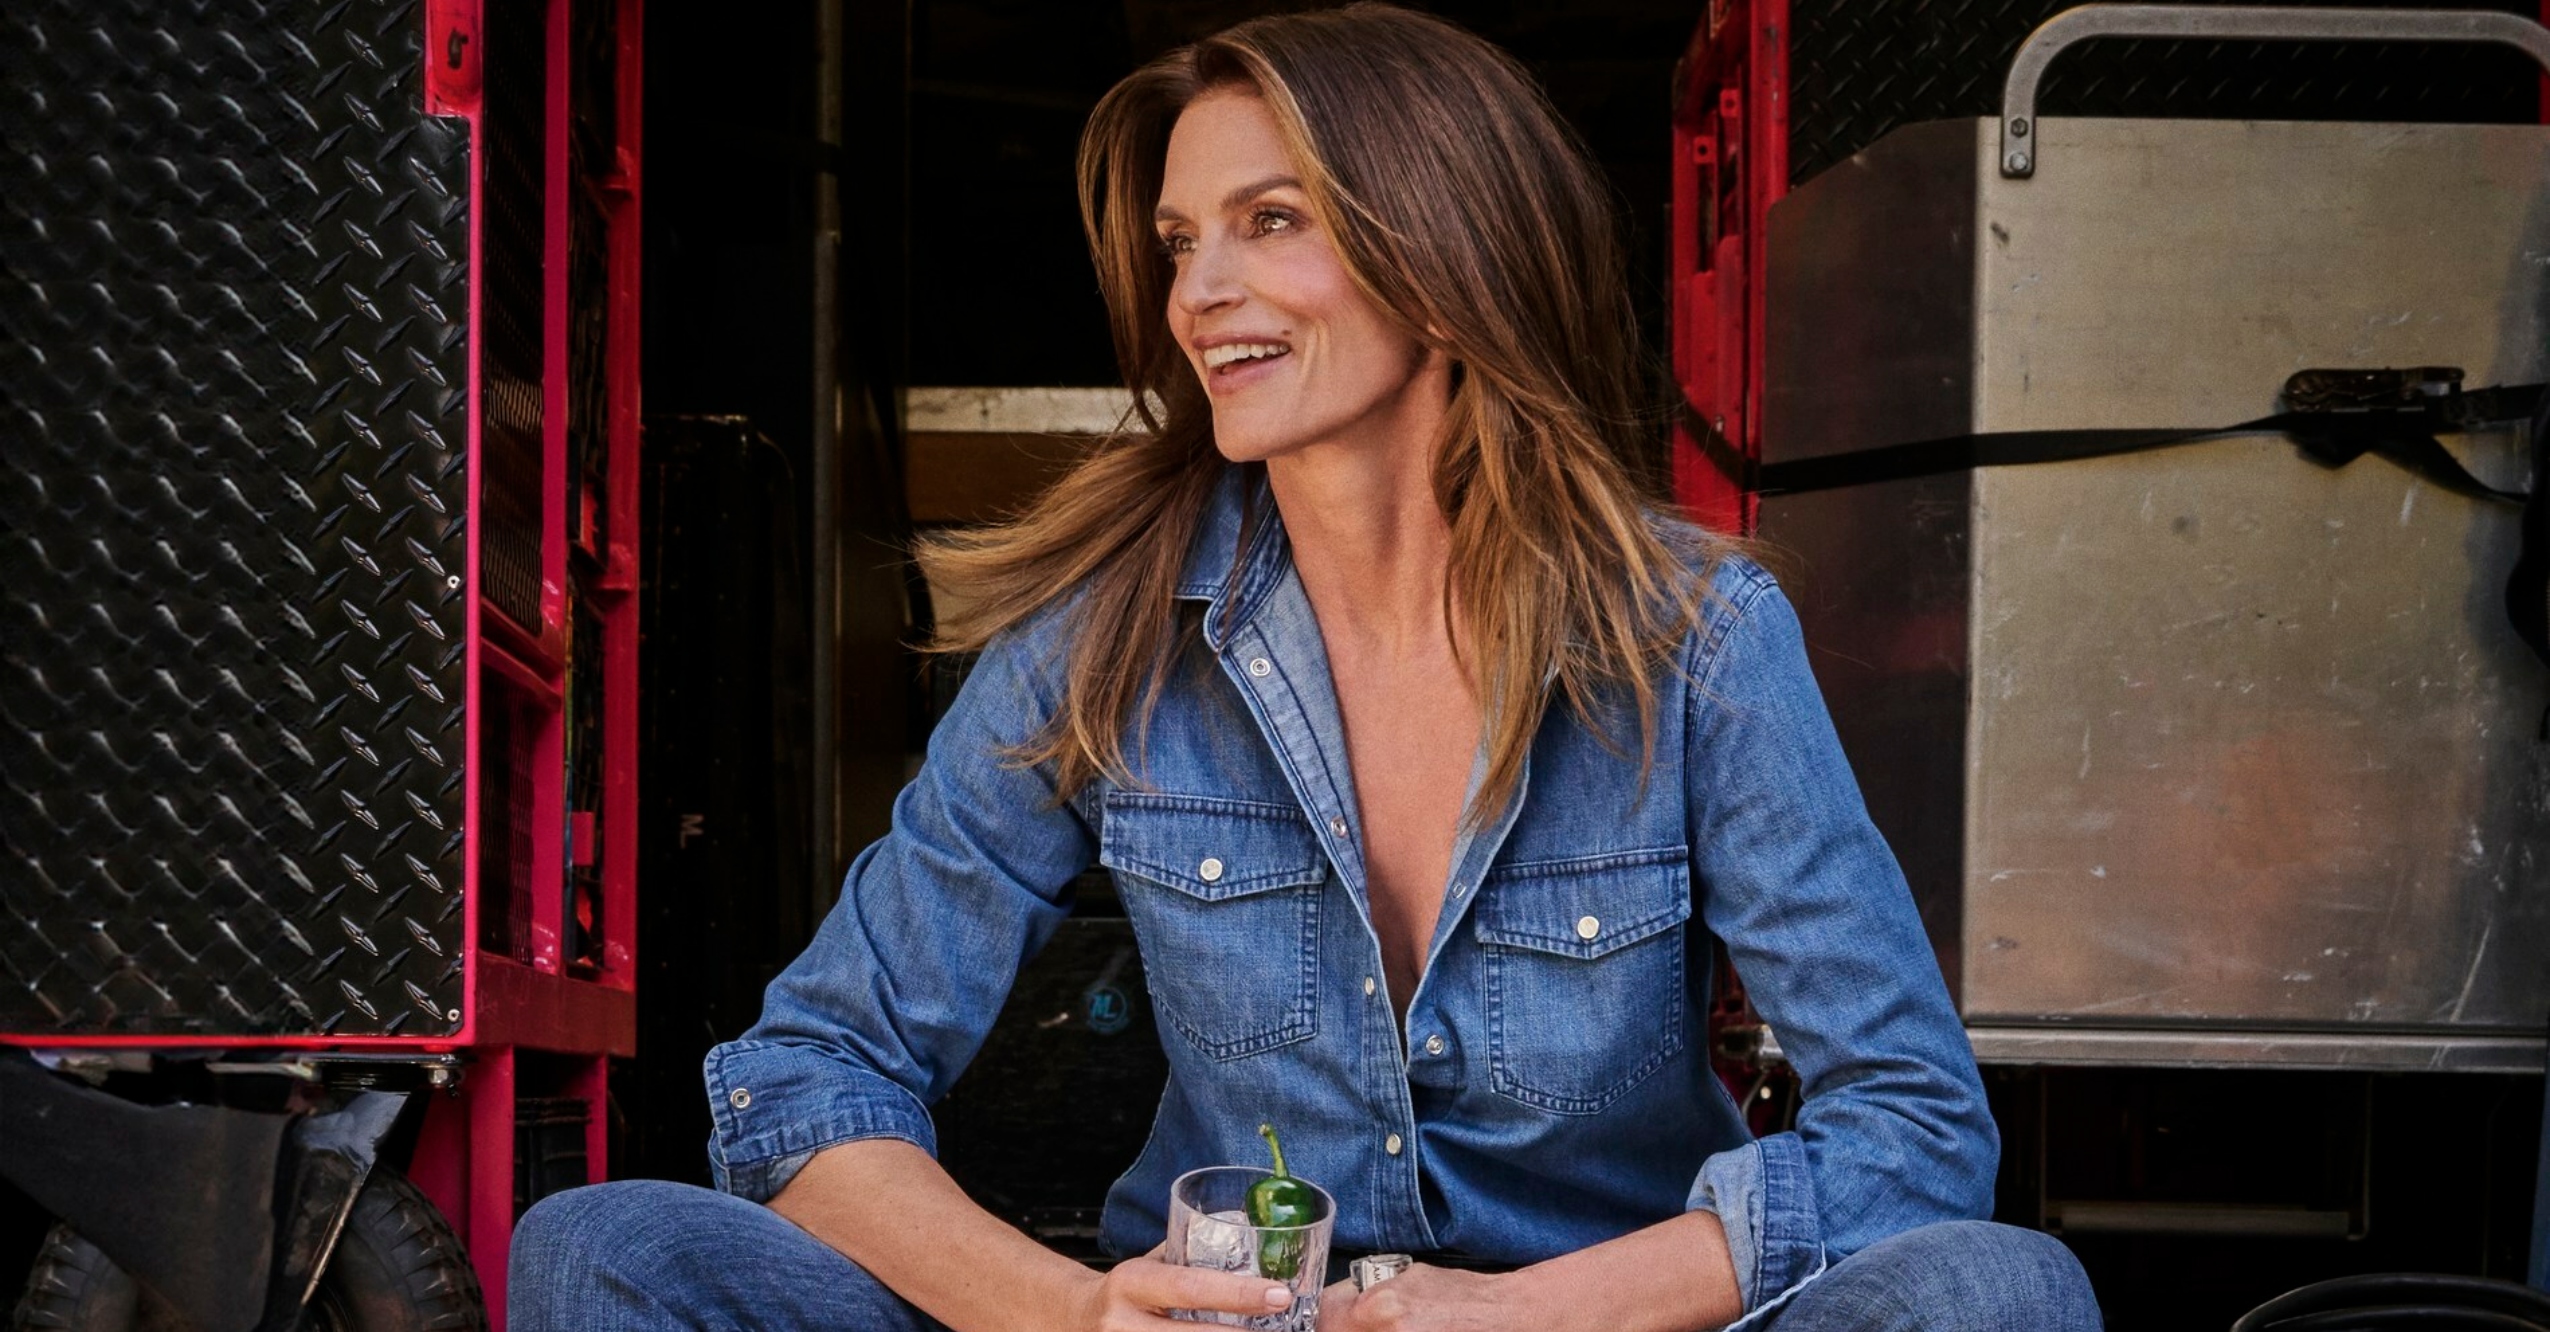 Cindy Crawford Teams With Casamigos For Jalapeño Tequila